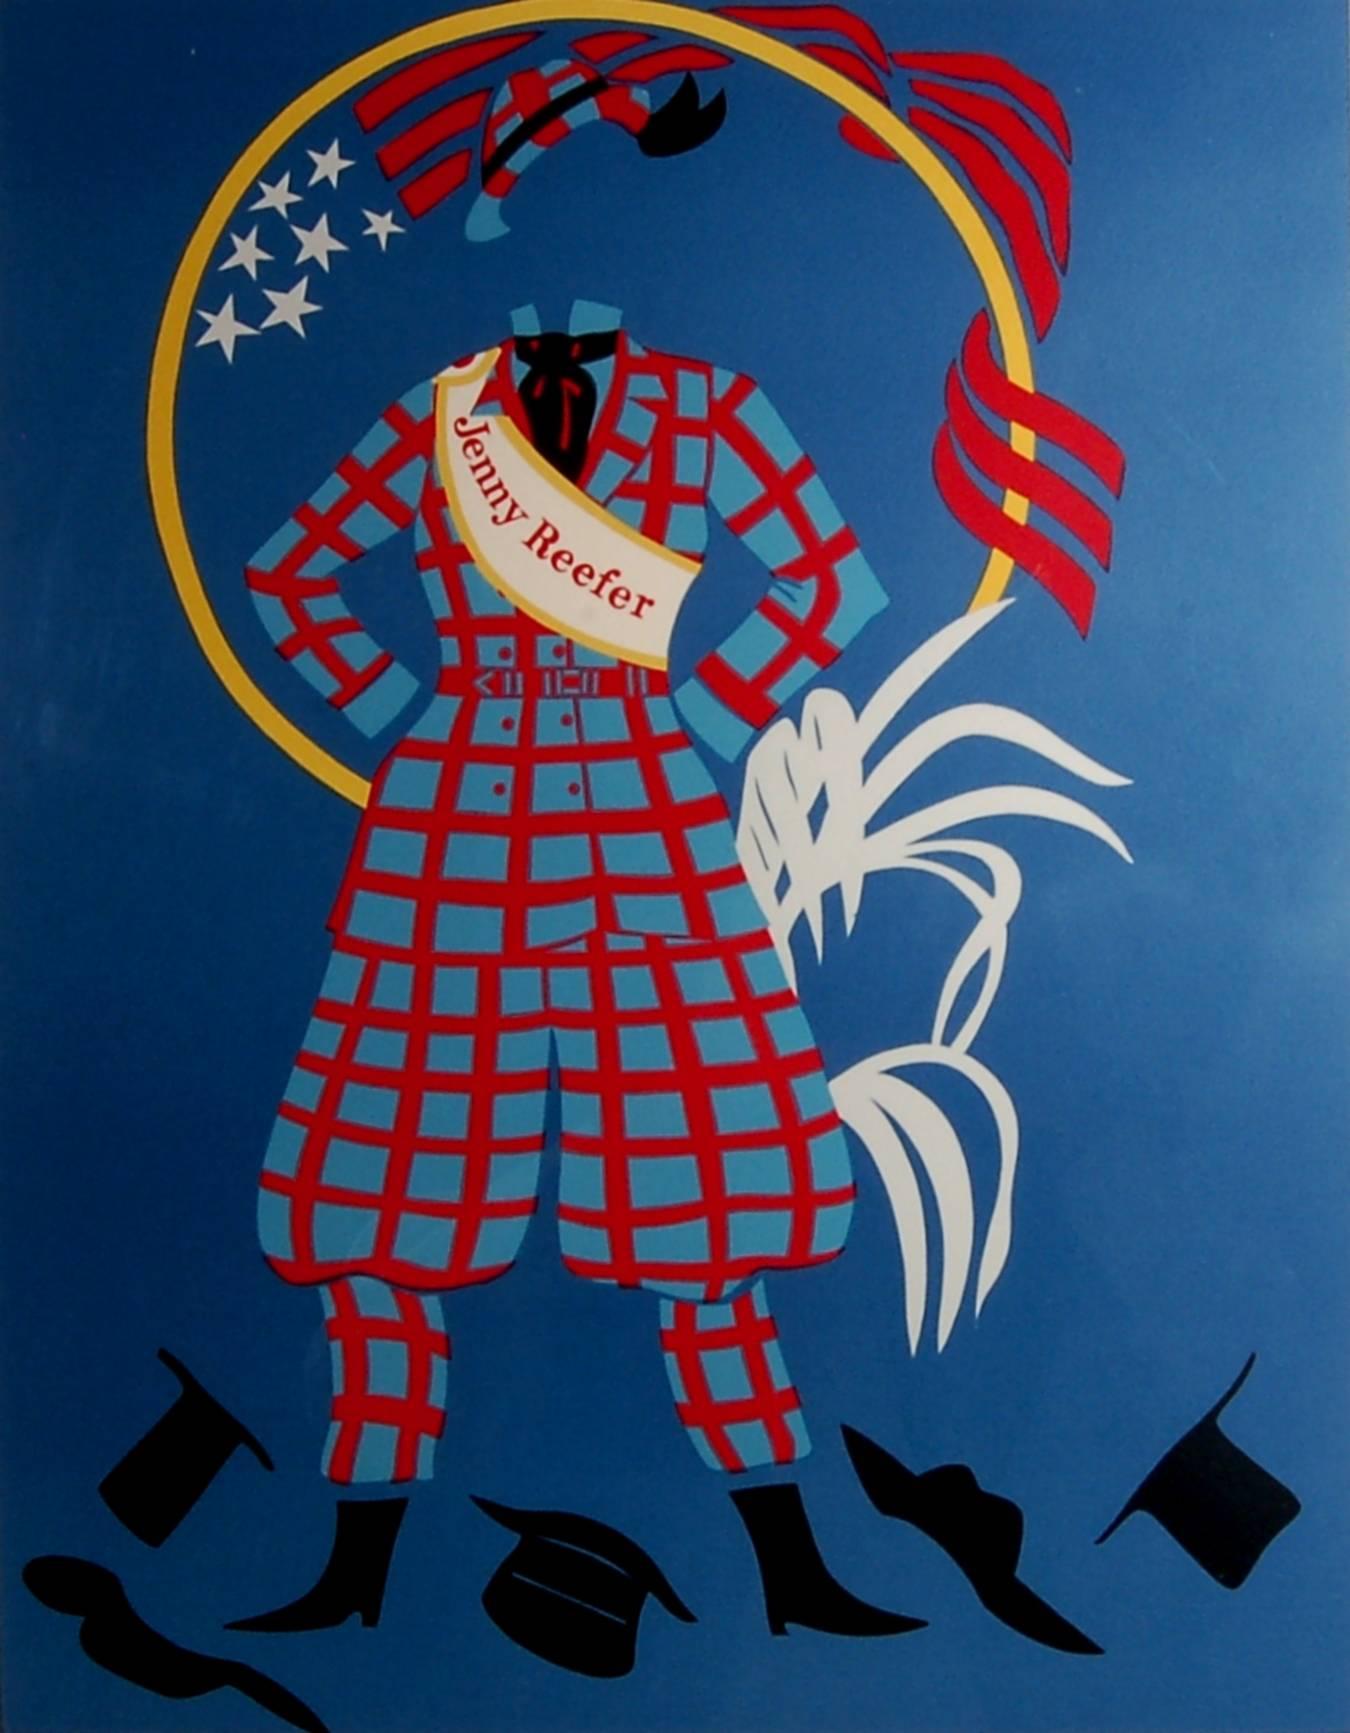 Jenny Reefer, from the suite, The Mother Of All Us. - Print by Robert Indiana